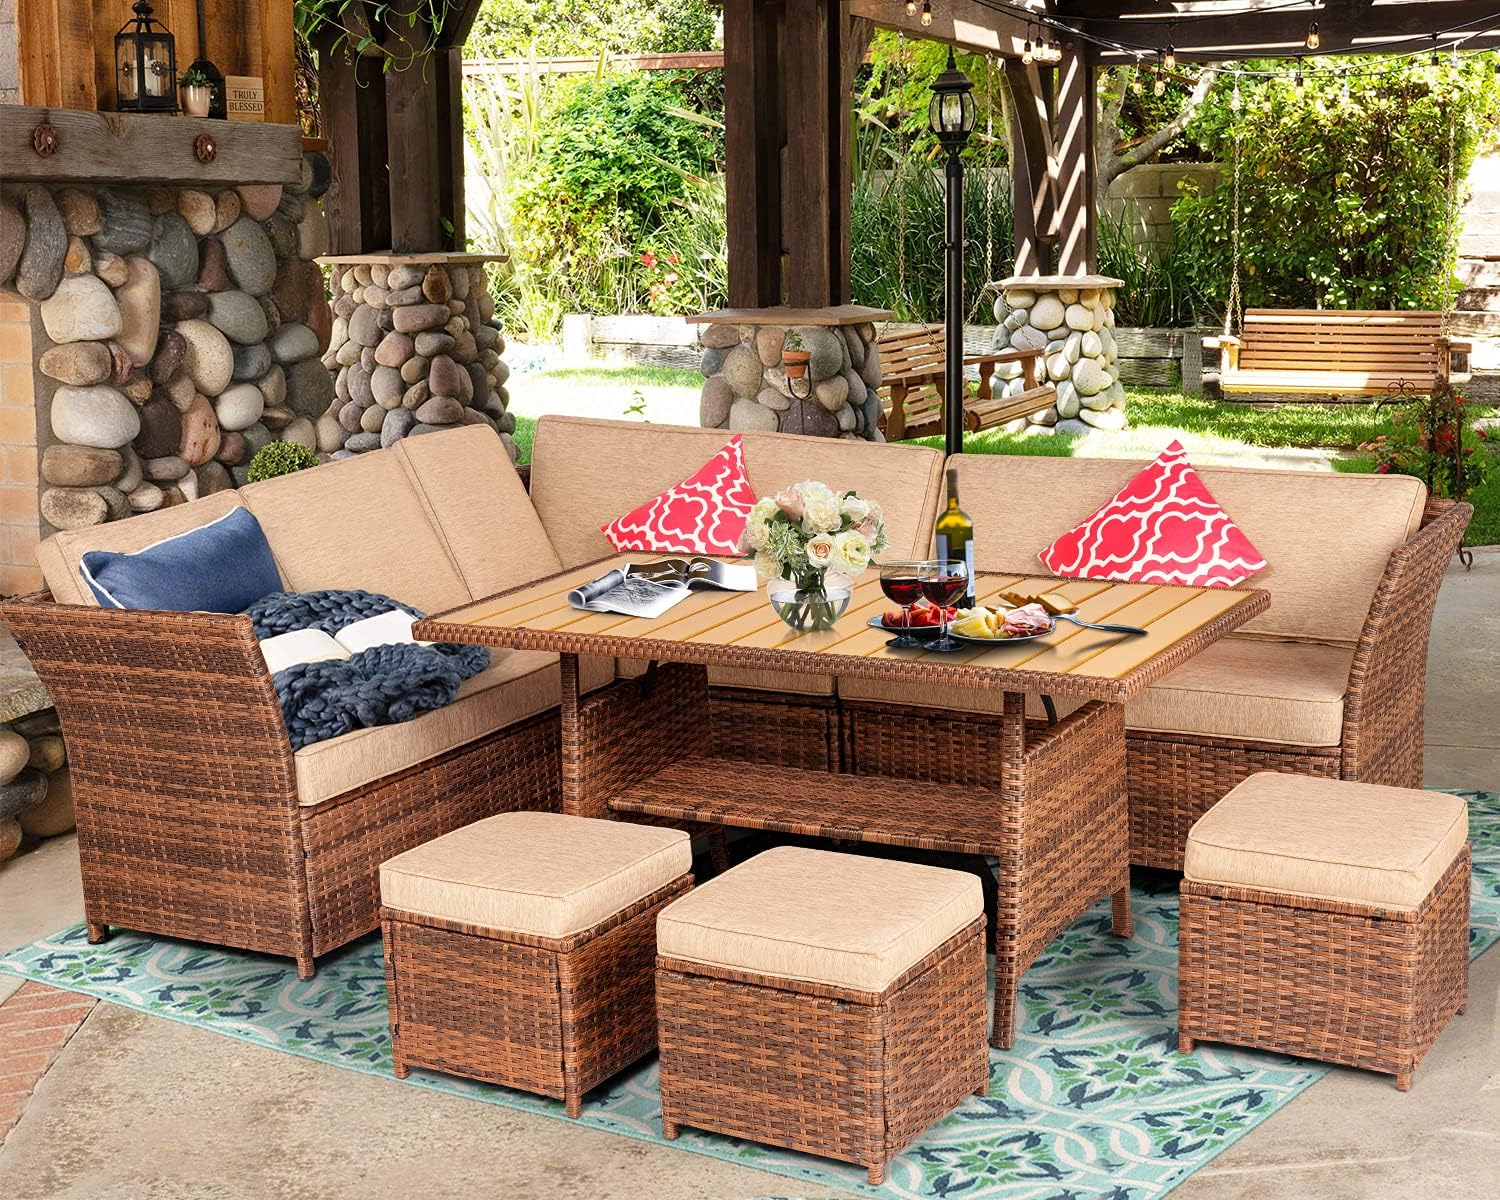 Looking For Durable Outdoor Furniture This Year. Try The Brookbury 5 Piece Wicker Set